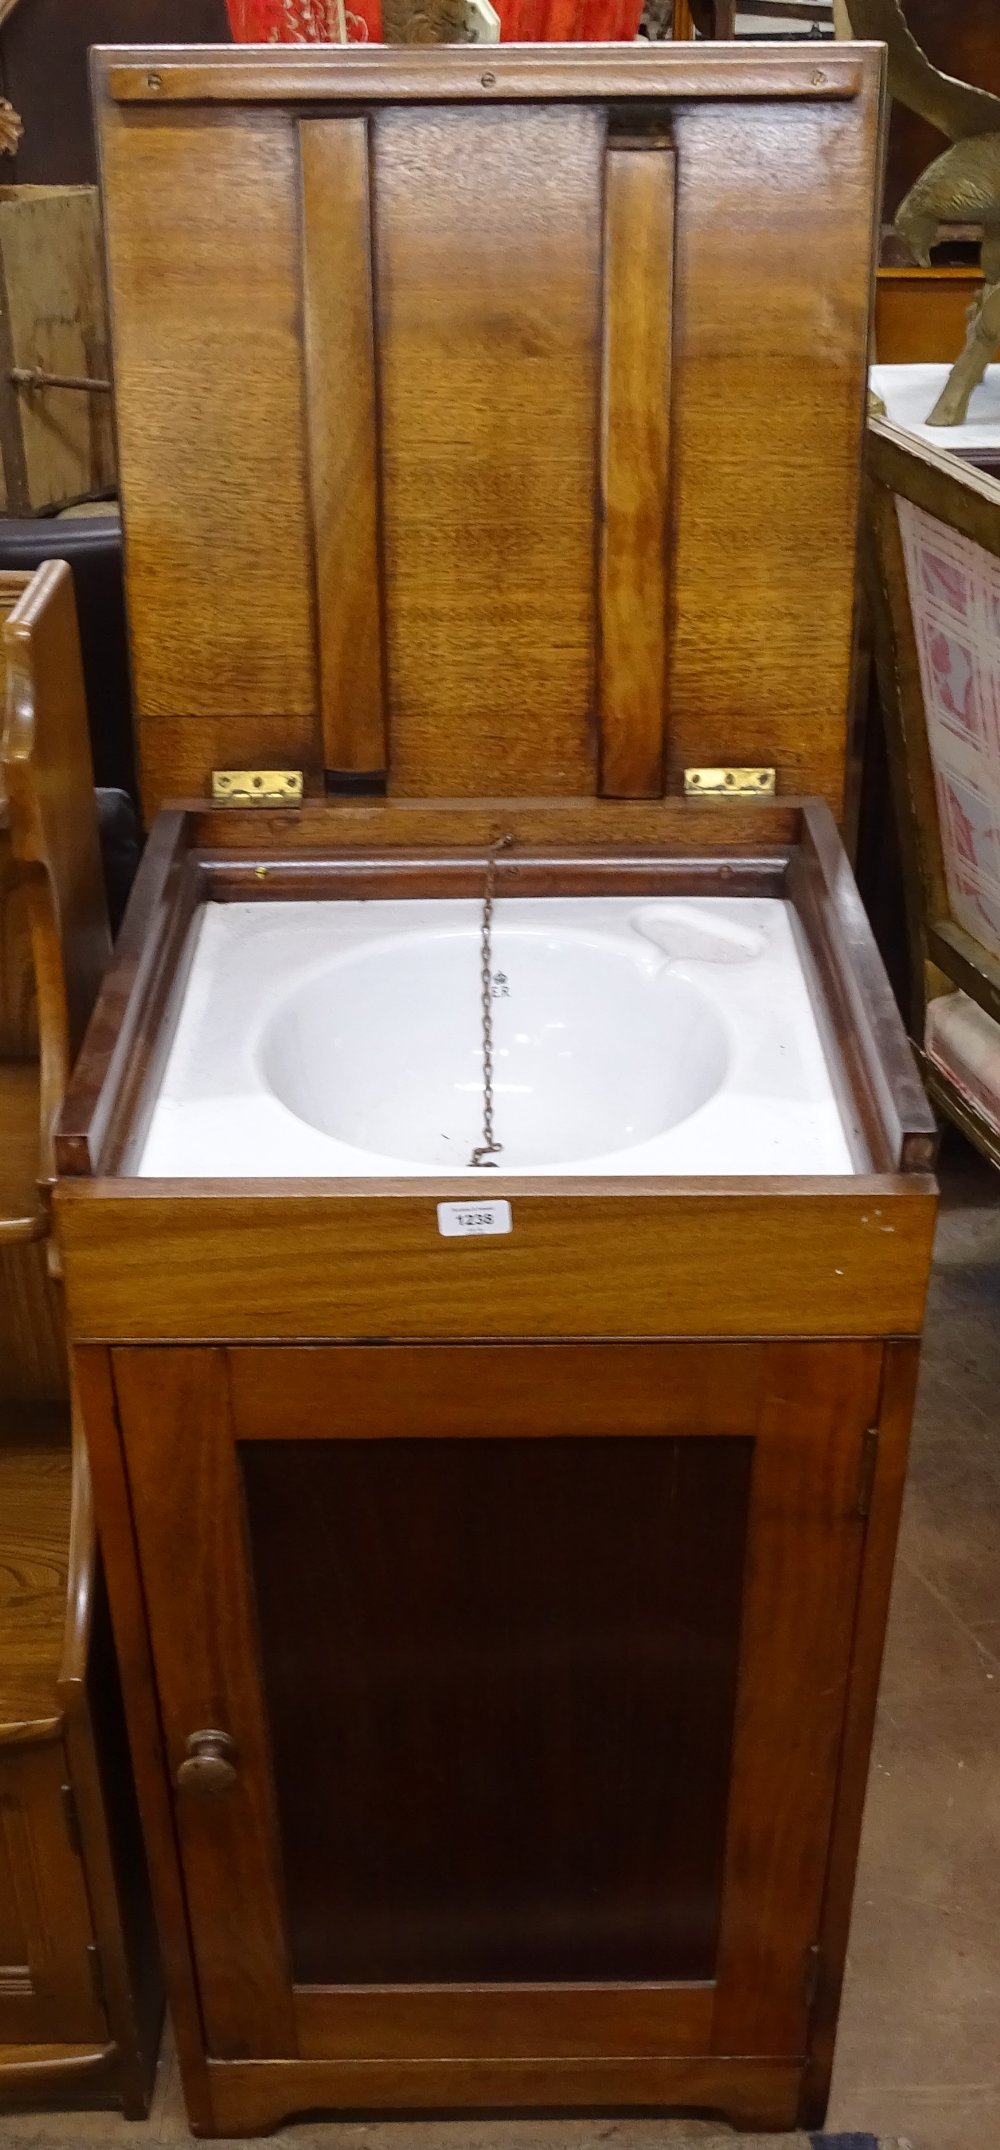 A mahogany campaign washstand, the rising lid revealing an enamel sink with cupboard under, W48cm